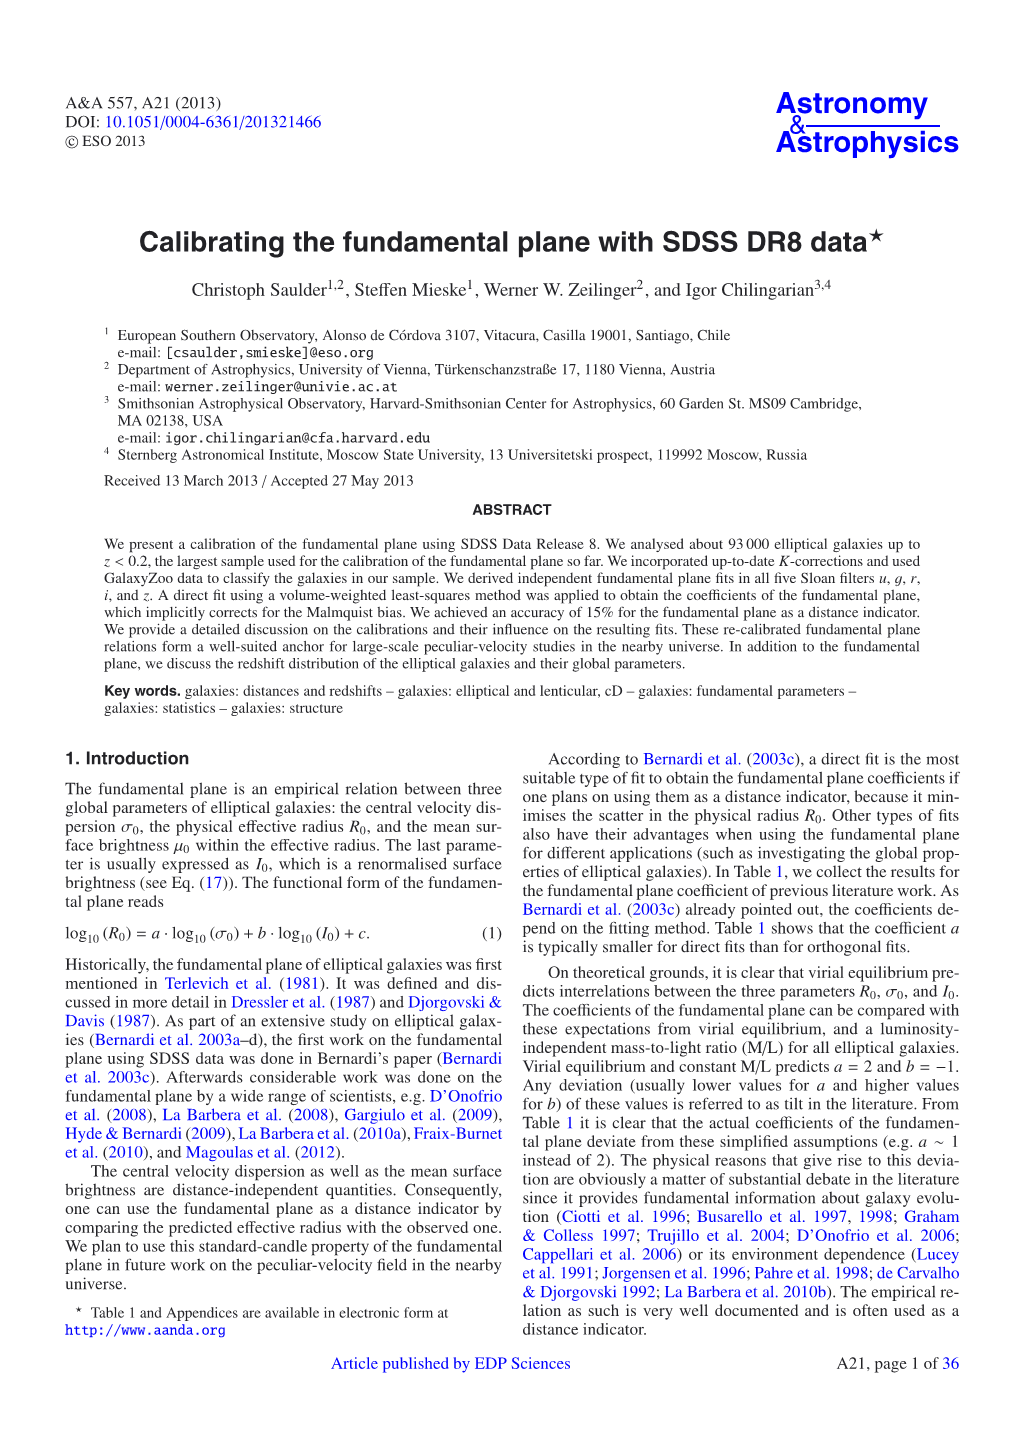 Calibrating the Fundamental Plane with SDSS DR8 Data⋆